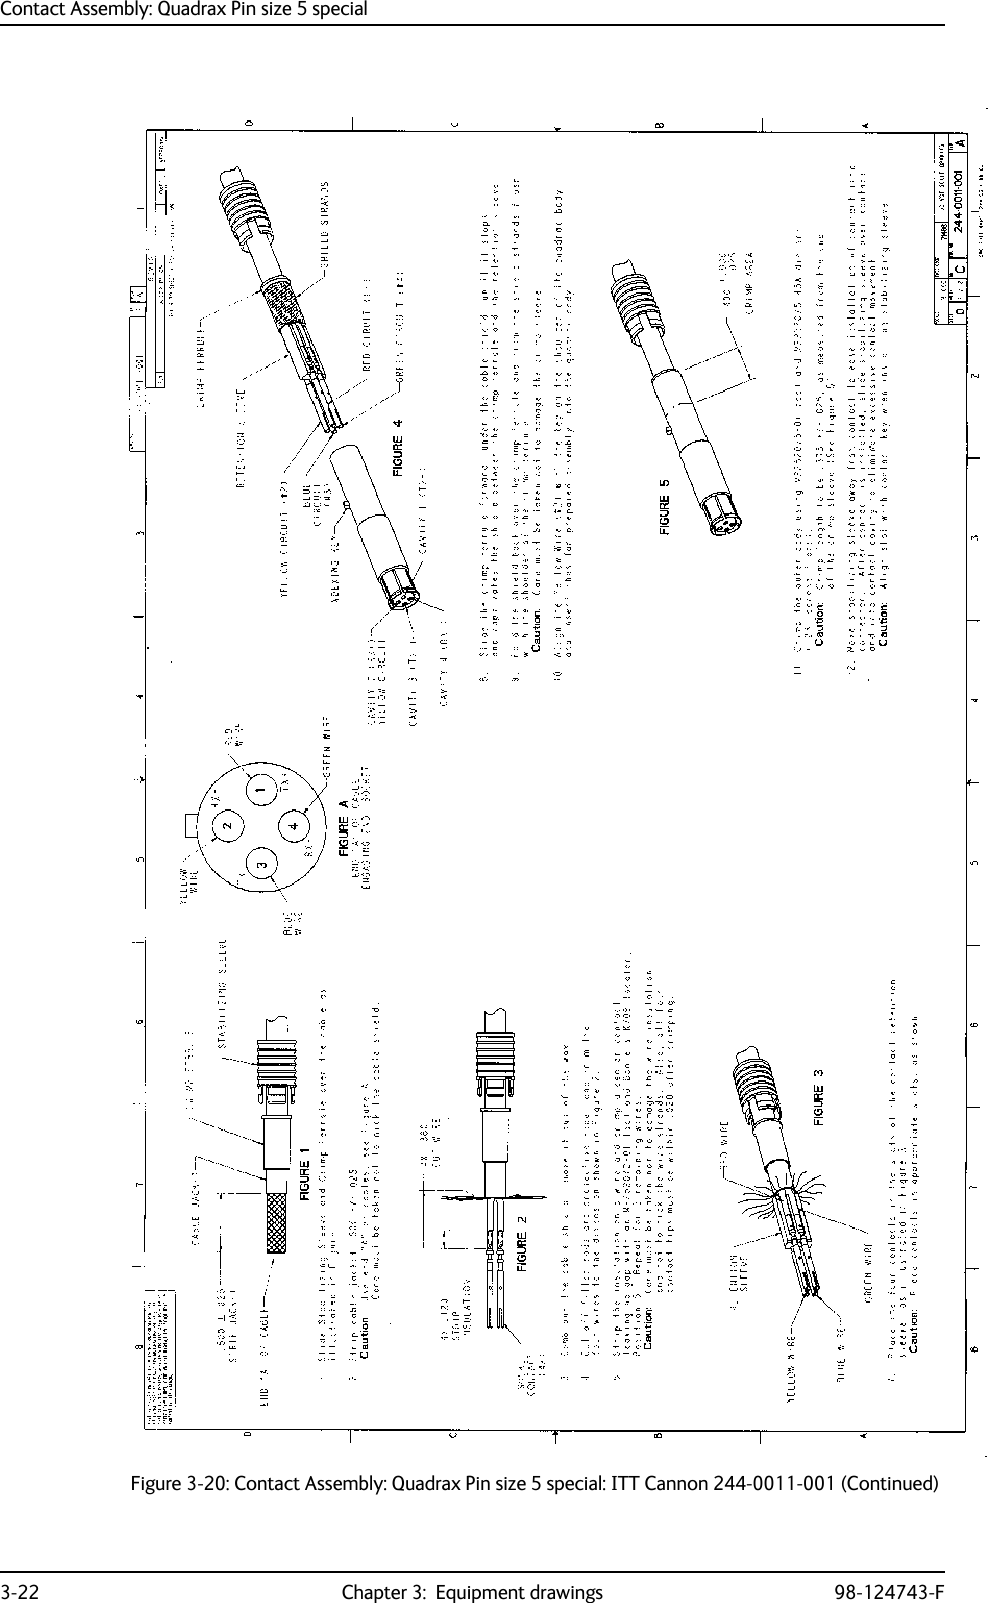 Contact Assembly: Quadrax Pin size 5 special3-22 Chapter 3:  Equipment drawings 98-124743-FFigure 3-20: Contact Assembly: Quadrax Pin size 5 special: ITT Cannon 244-0011-001 (Continued)